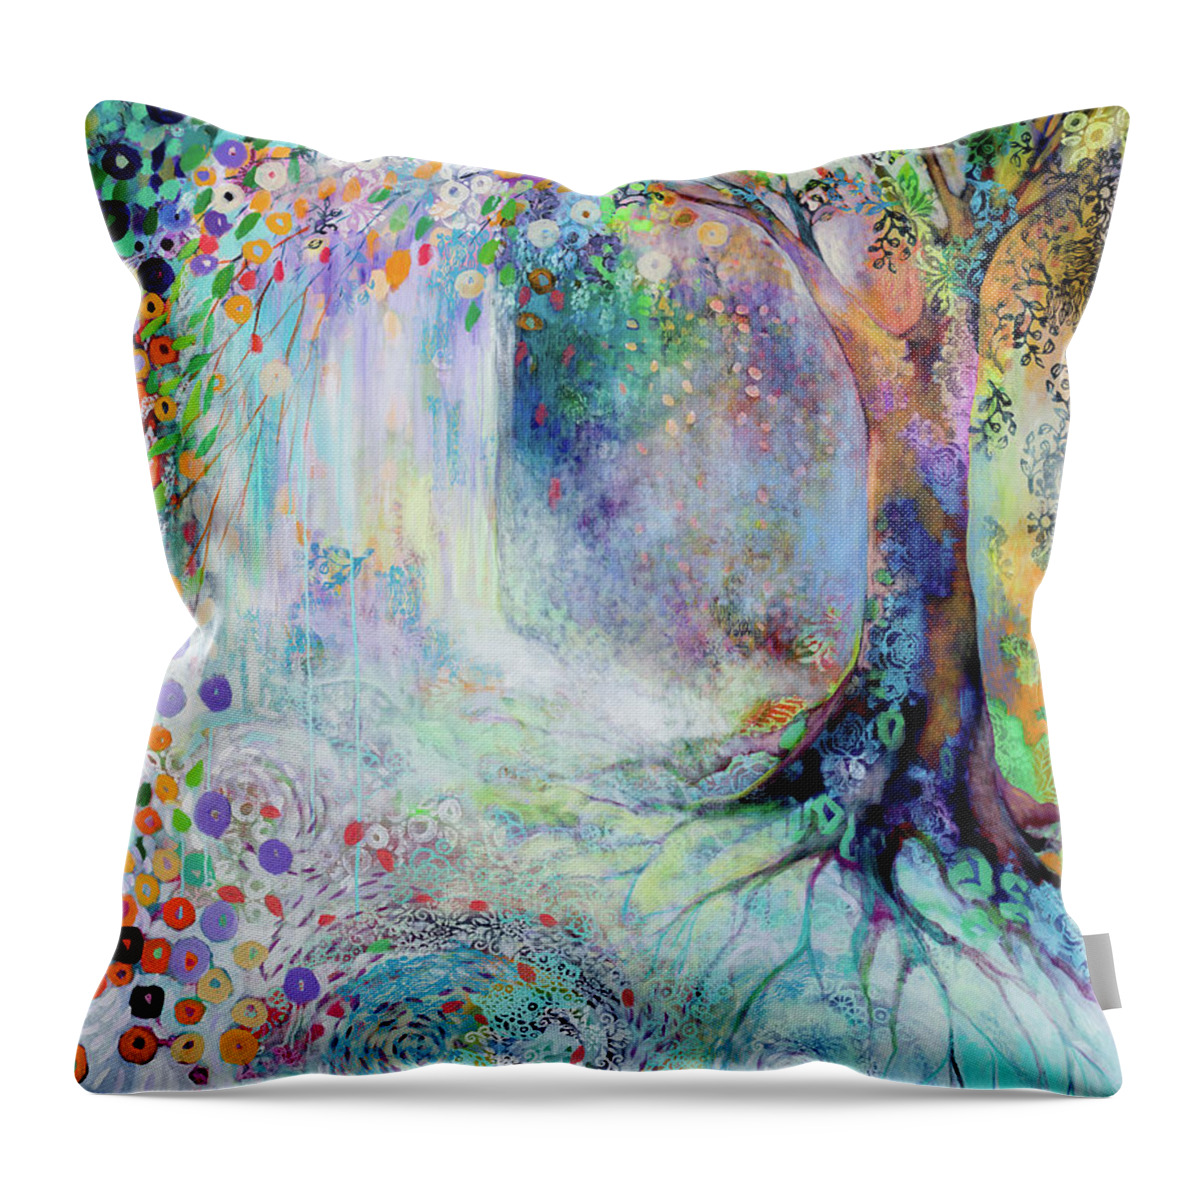 Waterfall Throw Pillow featuring the painting Searching for Forgotten Paths III by Jennifer Lommers